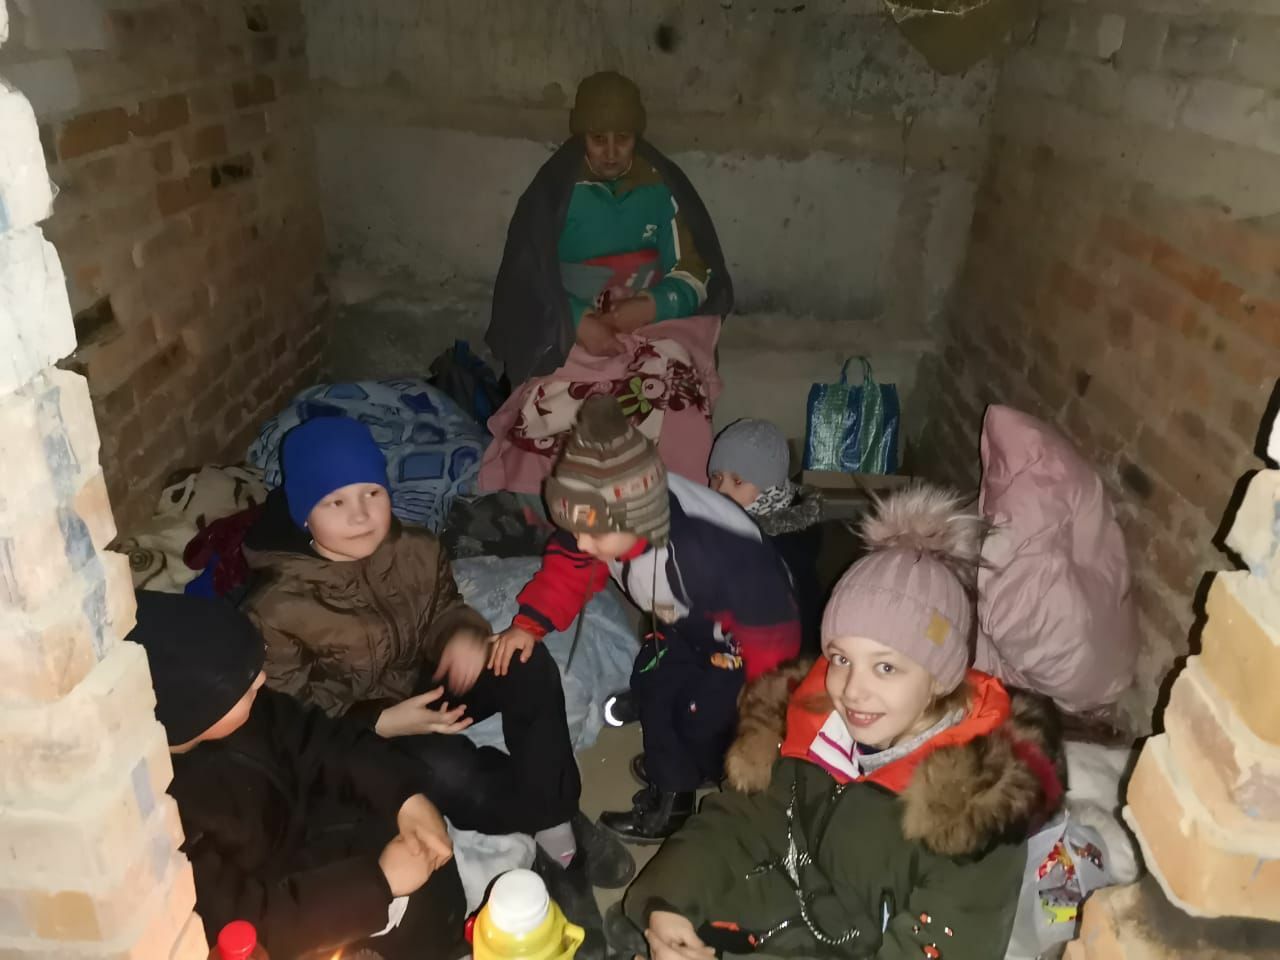 A family of Believers sheltering inside a basement for protection from the cold and missile attacks.